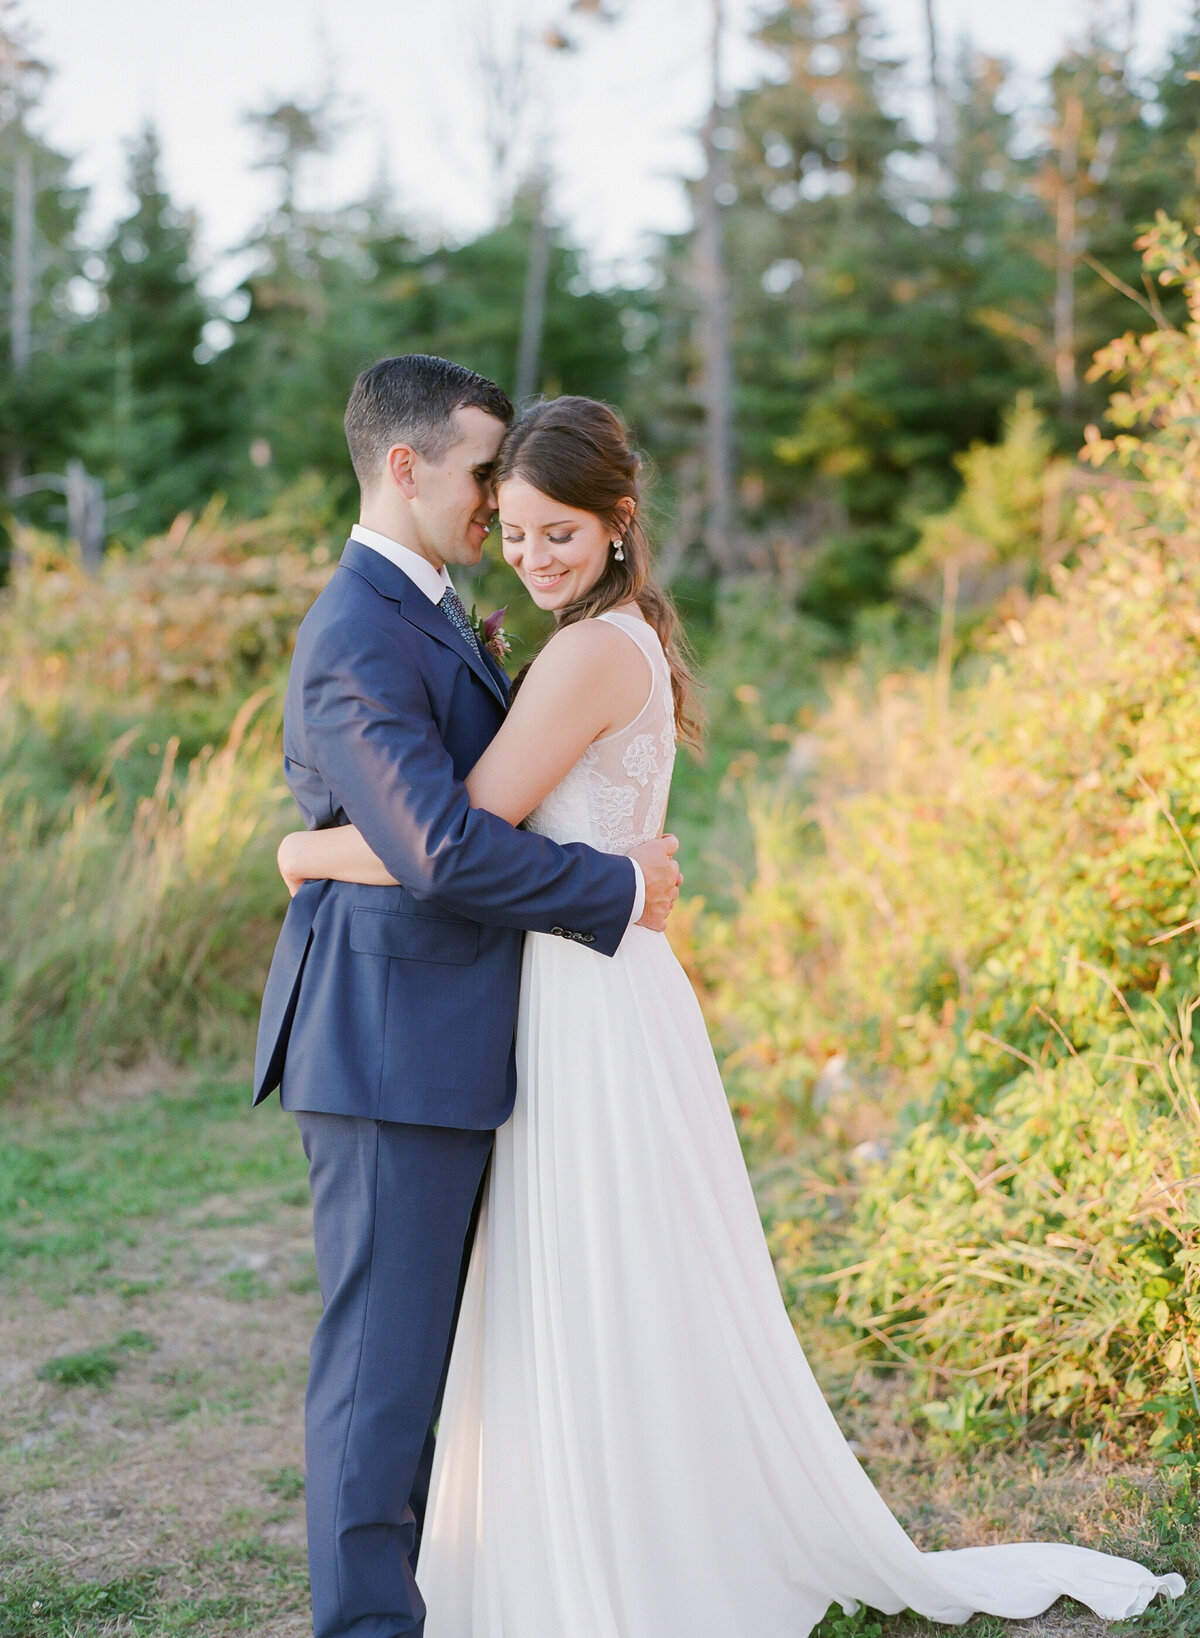 Jacqueline Anne Photography - Halifax Wedding Photographer - Jaclyn and Morgan-74